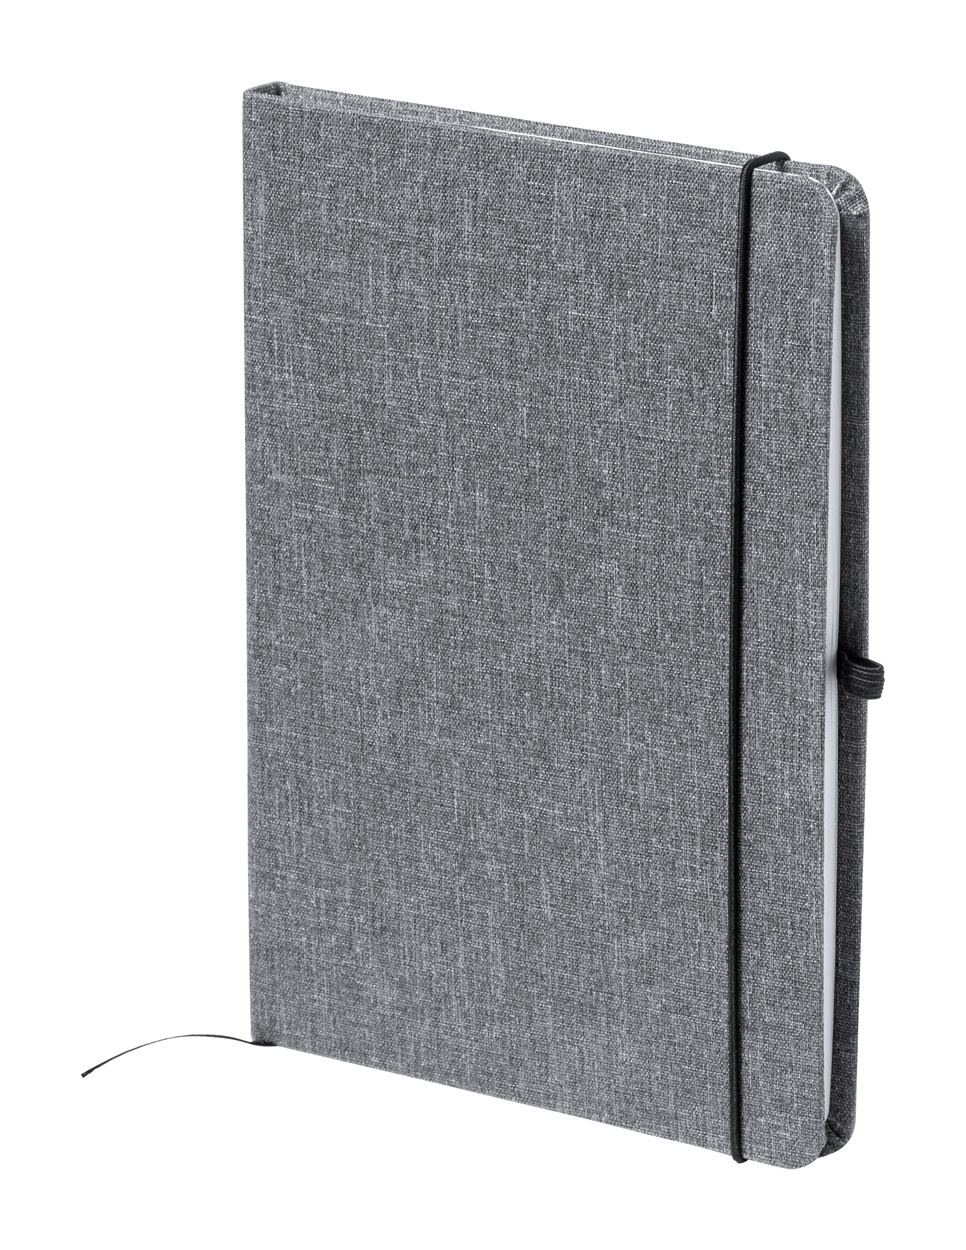 Lined notebook PACMEL with RPET cover, A5 format - grey